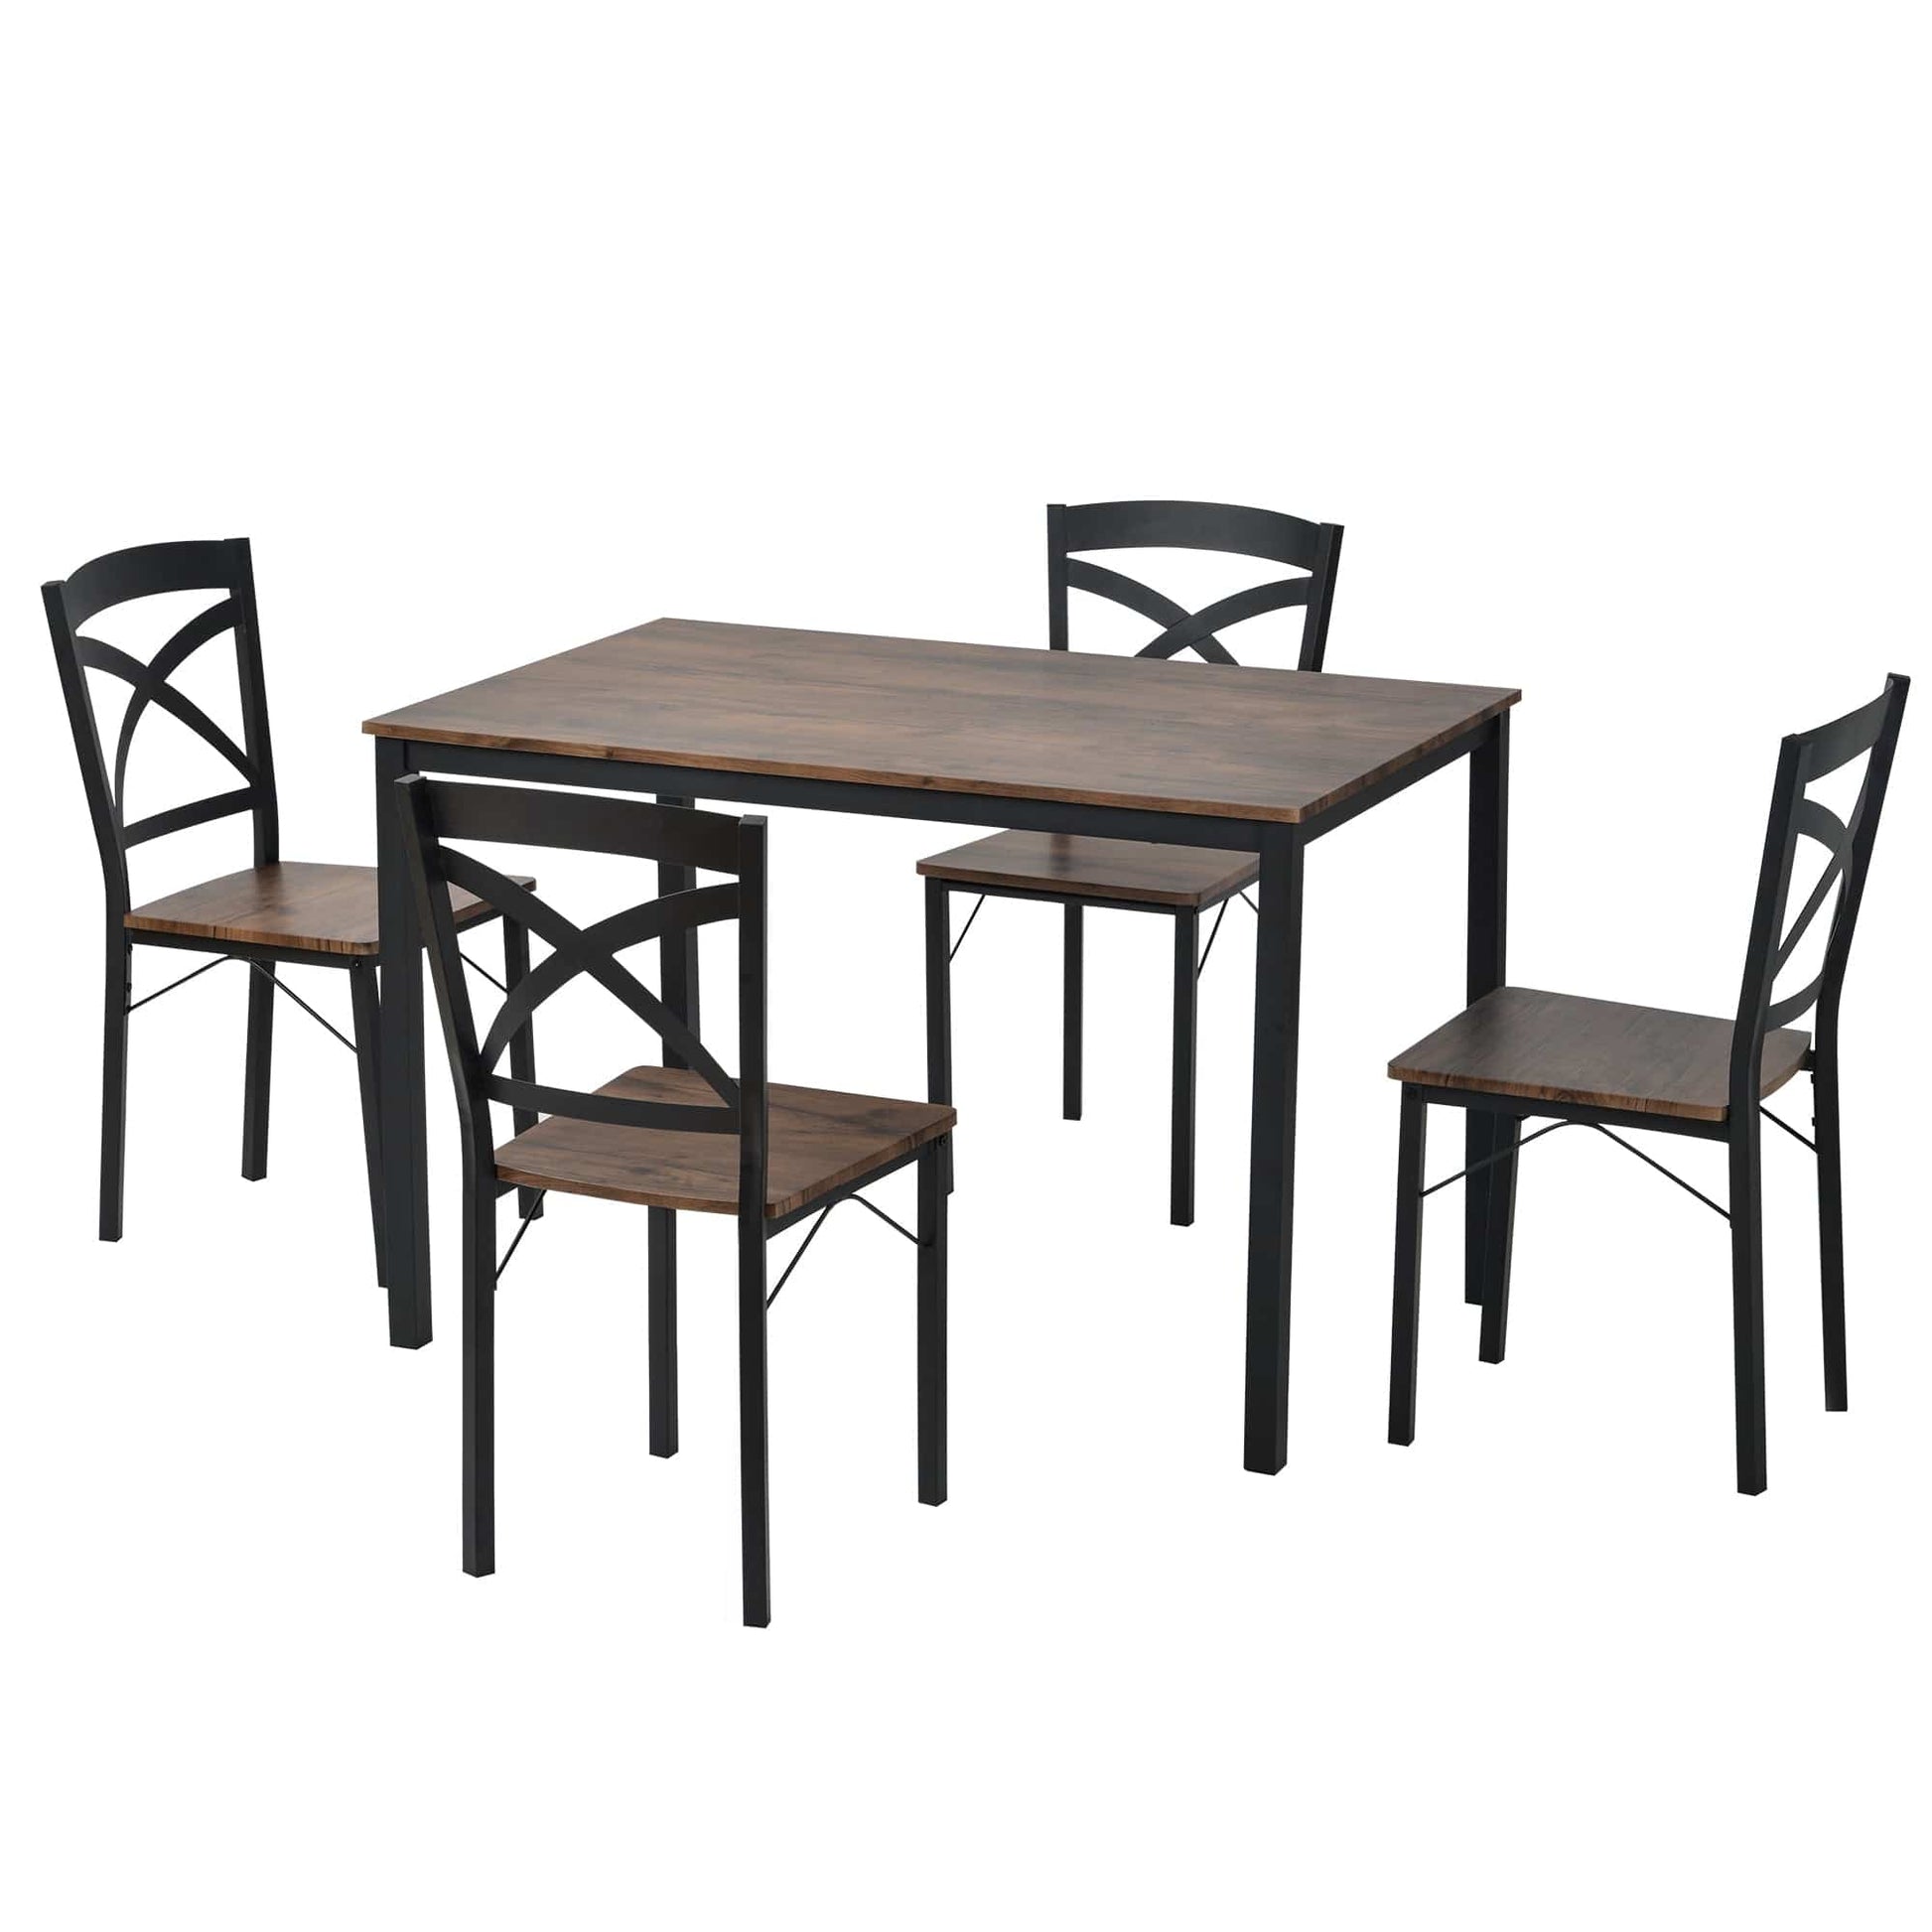 1st Choice Furniture Direct Dining Set 1st Choice 5- Piece Brown Wooden Dining Set with Table and 4 Chairs